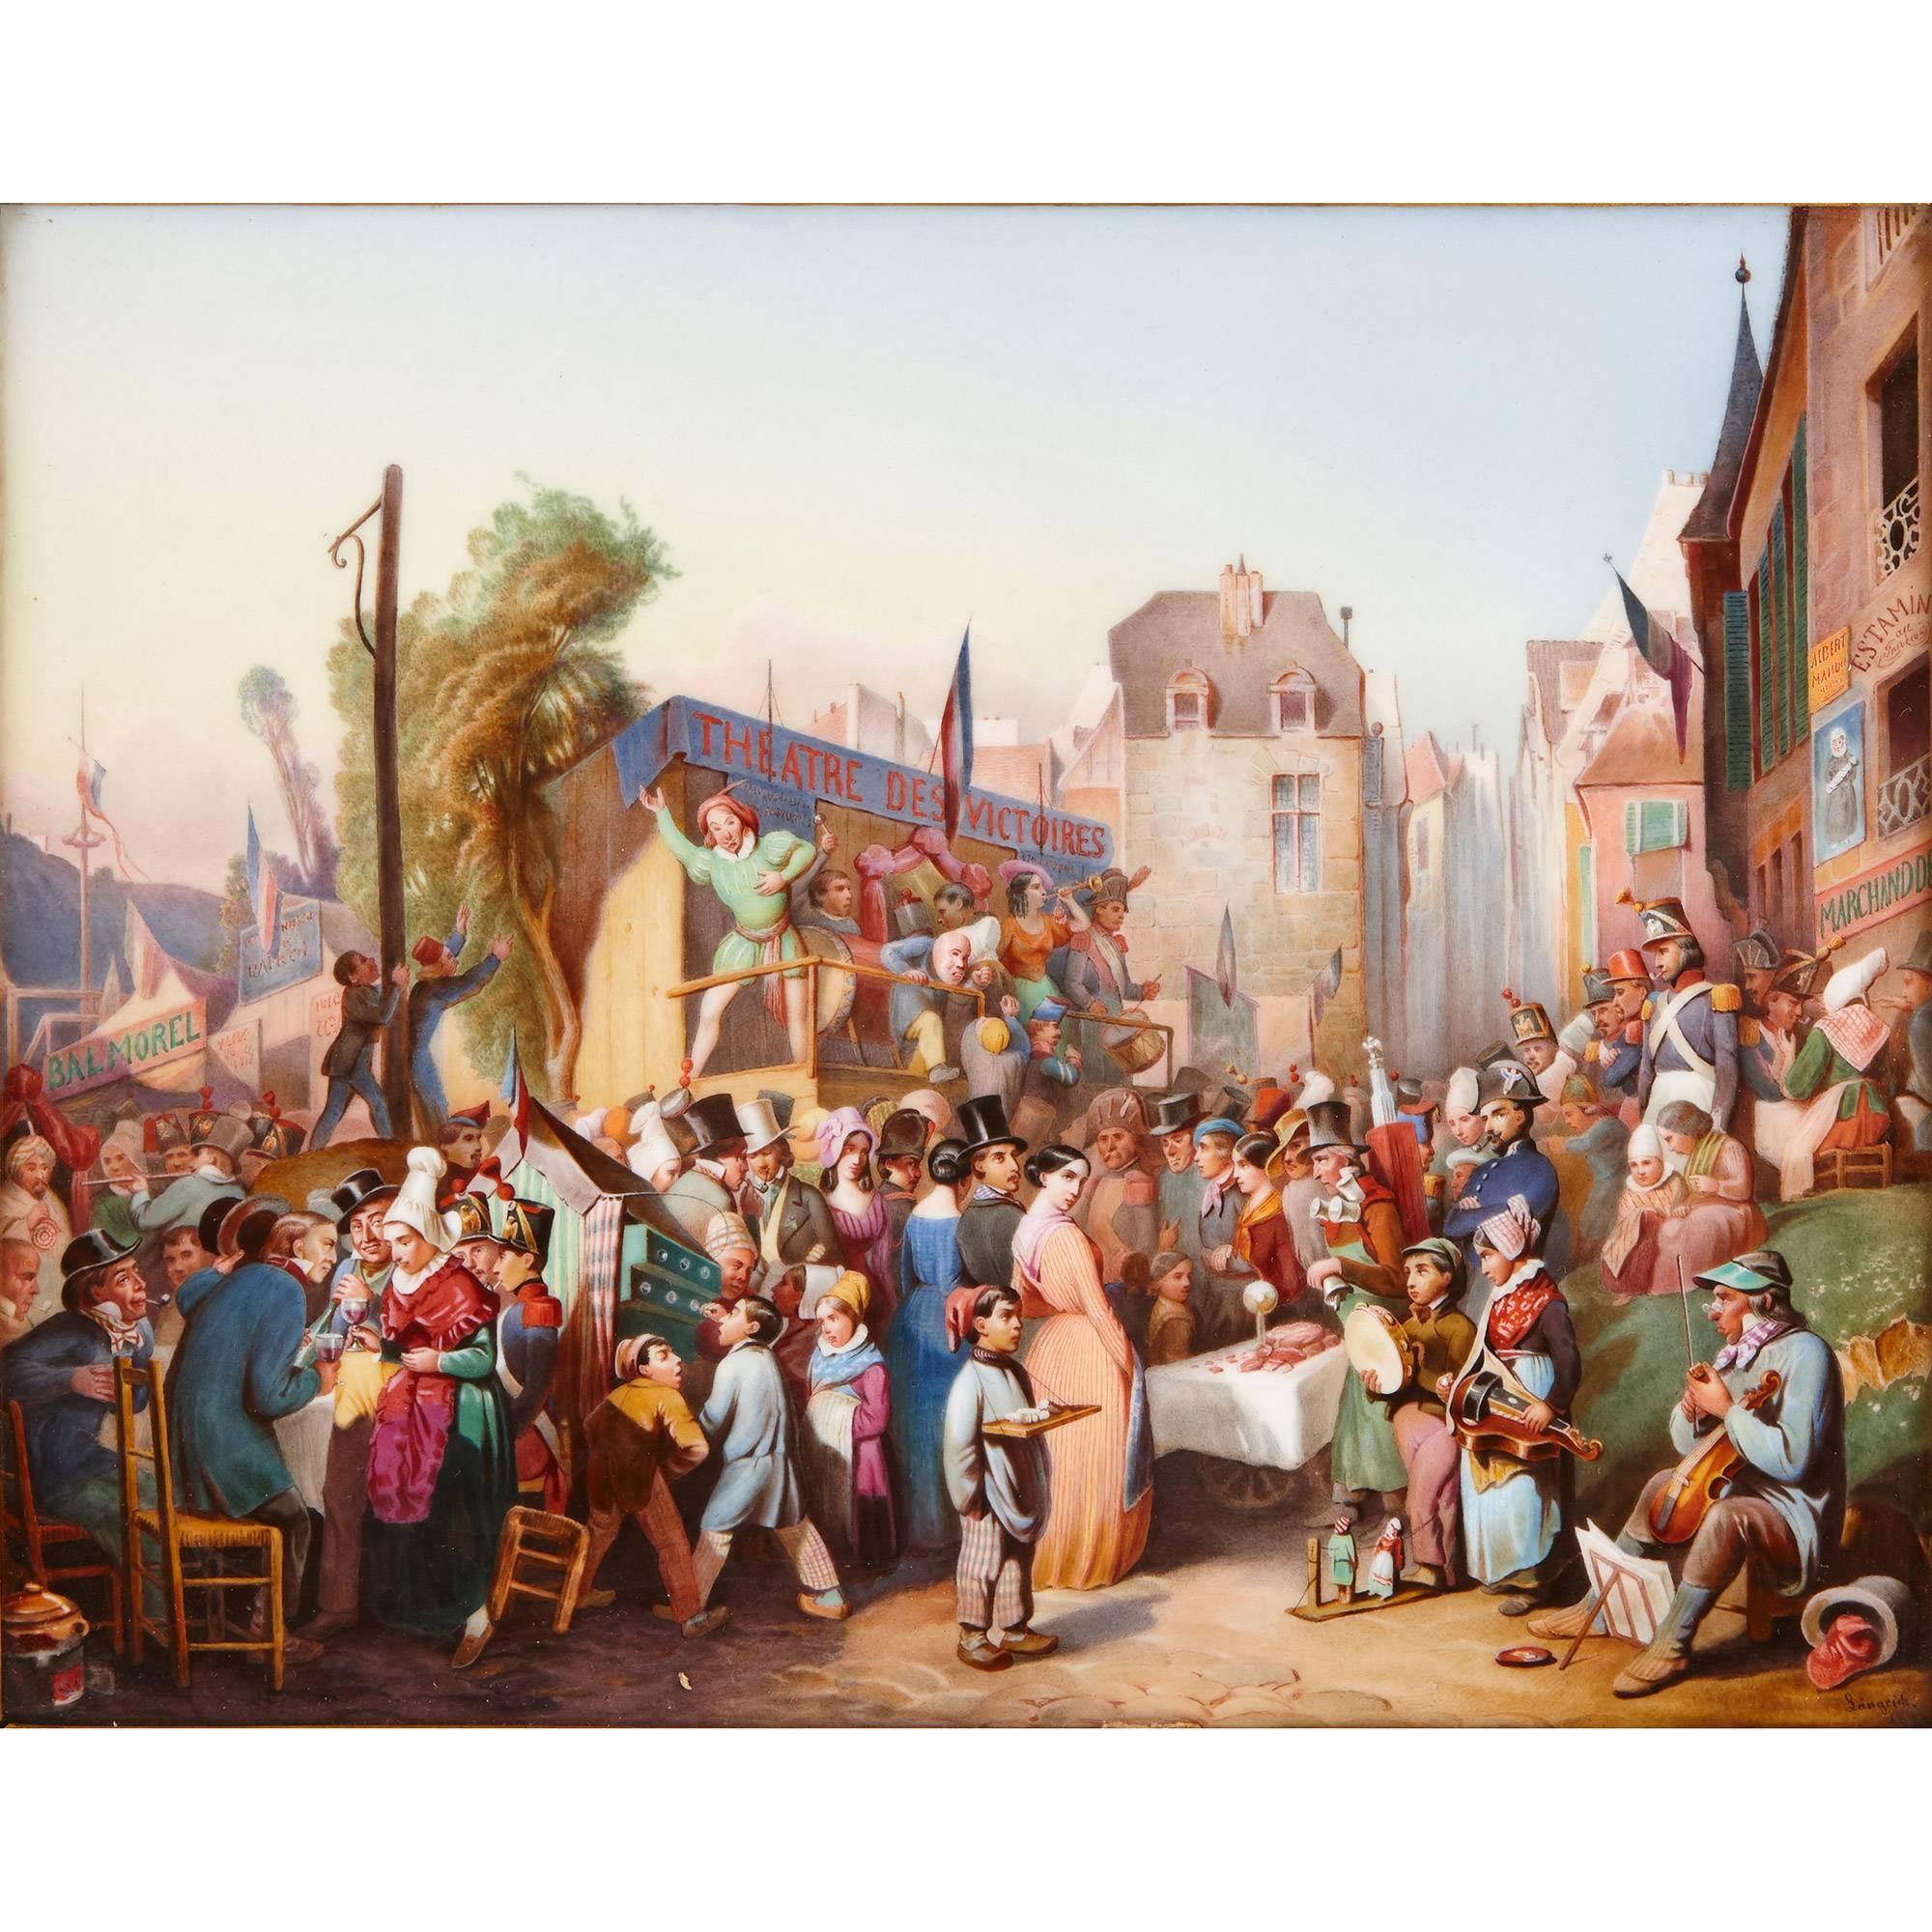 The 1844 summer market in the town of Lengerich, in the western German province of Westphalia, is the subject of this antique KPM porcelain plaque, making it an interesting piece of social history as well as a beautiful decorative piece. The scene